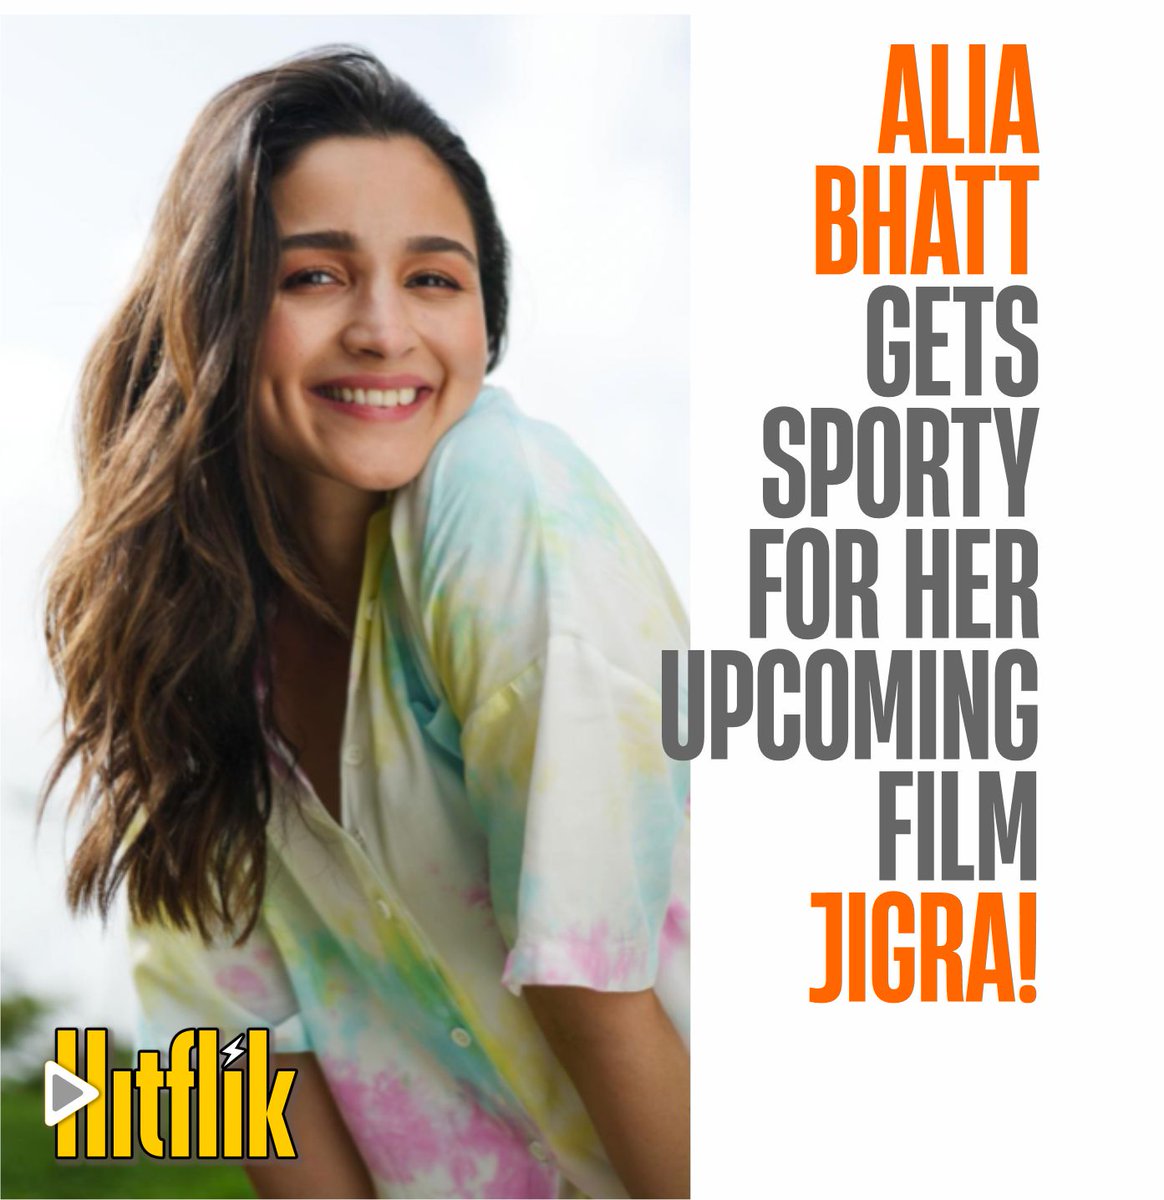 Alia Bhatt gets sporty for her upcoming film JIGRA! The actress underwent basketball training to authentically portray her character. Jigra also stars #VedangRaina and releases September 27th! #AliaBhatt #Jigra #Bollywood #Hitflik